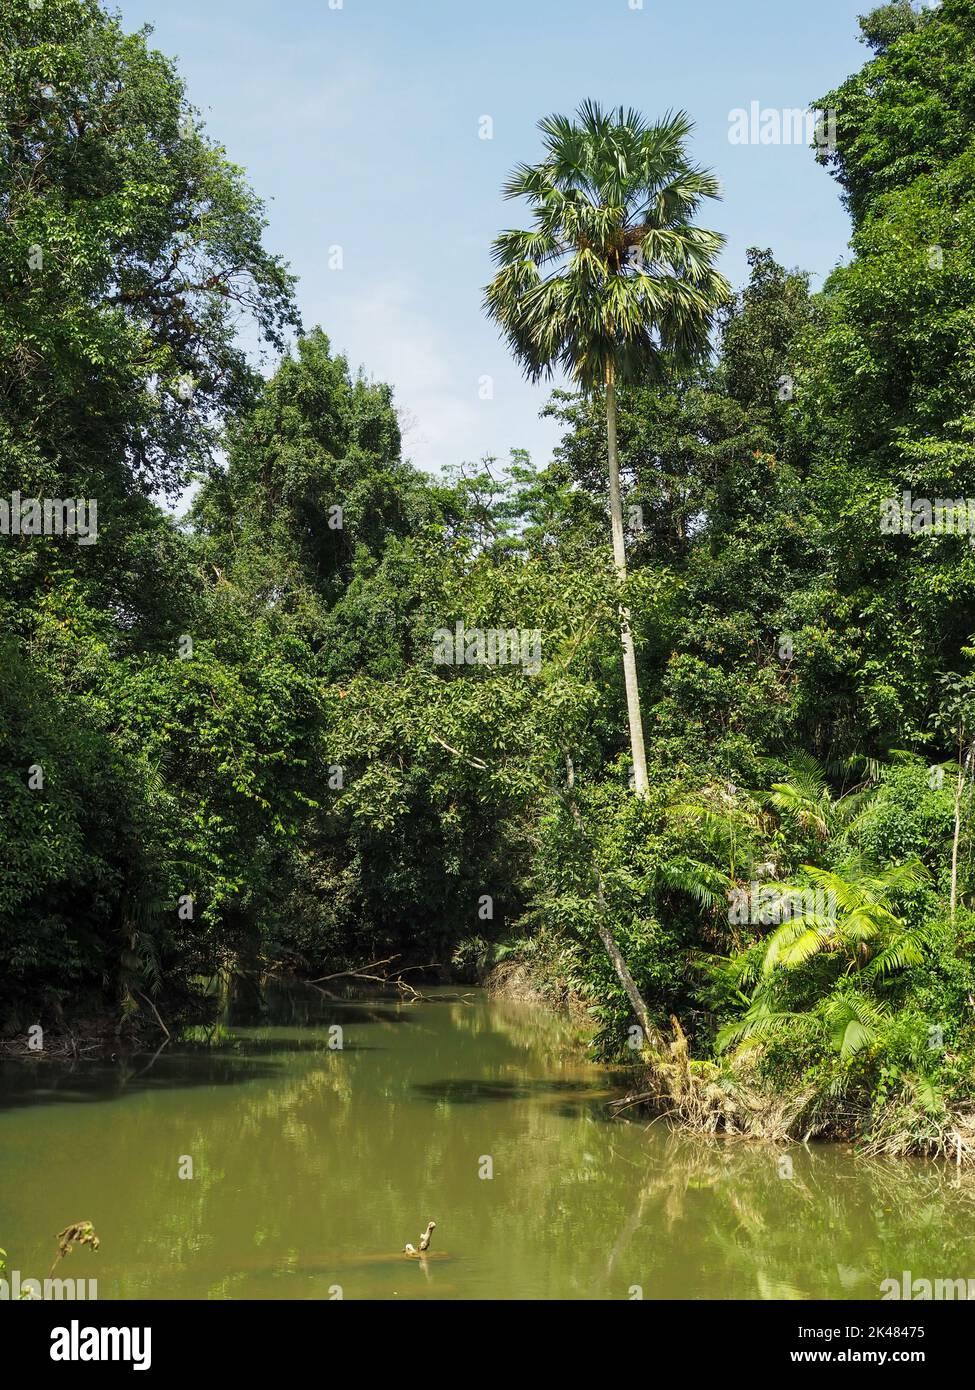 The scenery of the river, the rainforest, consists of rivers, trees, coconut trees. Stock Photo